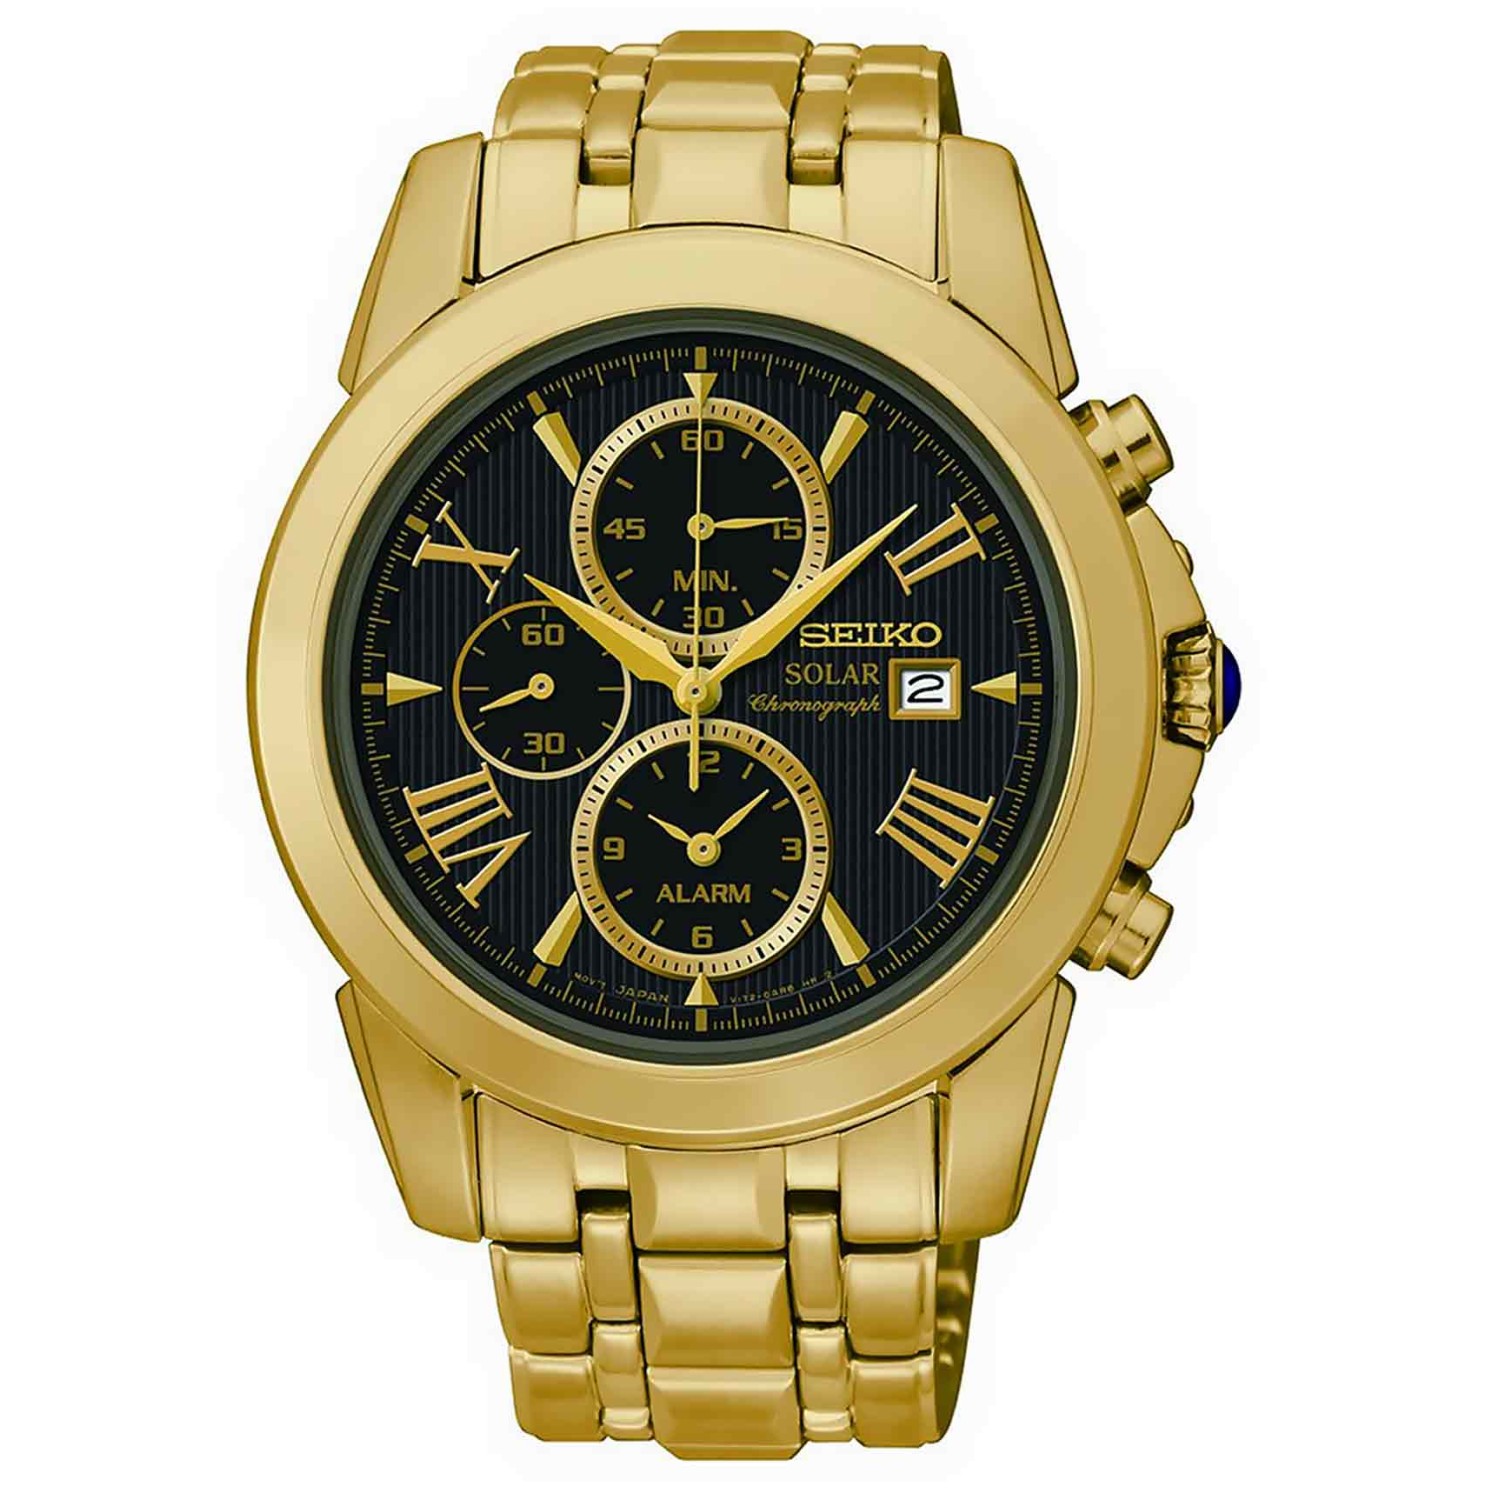 SSC196P-9  SEIKO Le Grand Sport Gold Solar Chronograph Watch. Available online or  at your Seiko Watch Specialist  - Christies Papatoetoe and Watch Station Manukau.3 Months No Payments and Interest for Q Card holders LAYBUY - Pay it easy, in 6 weekly paym